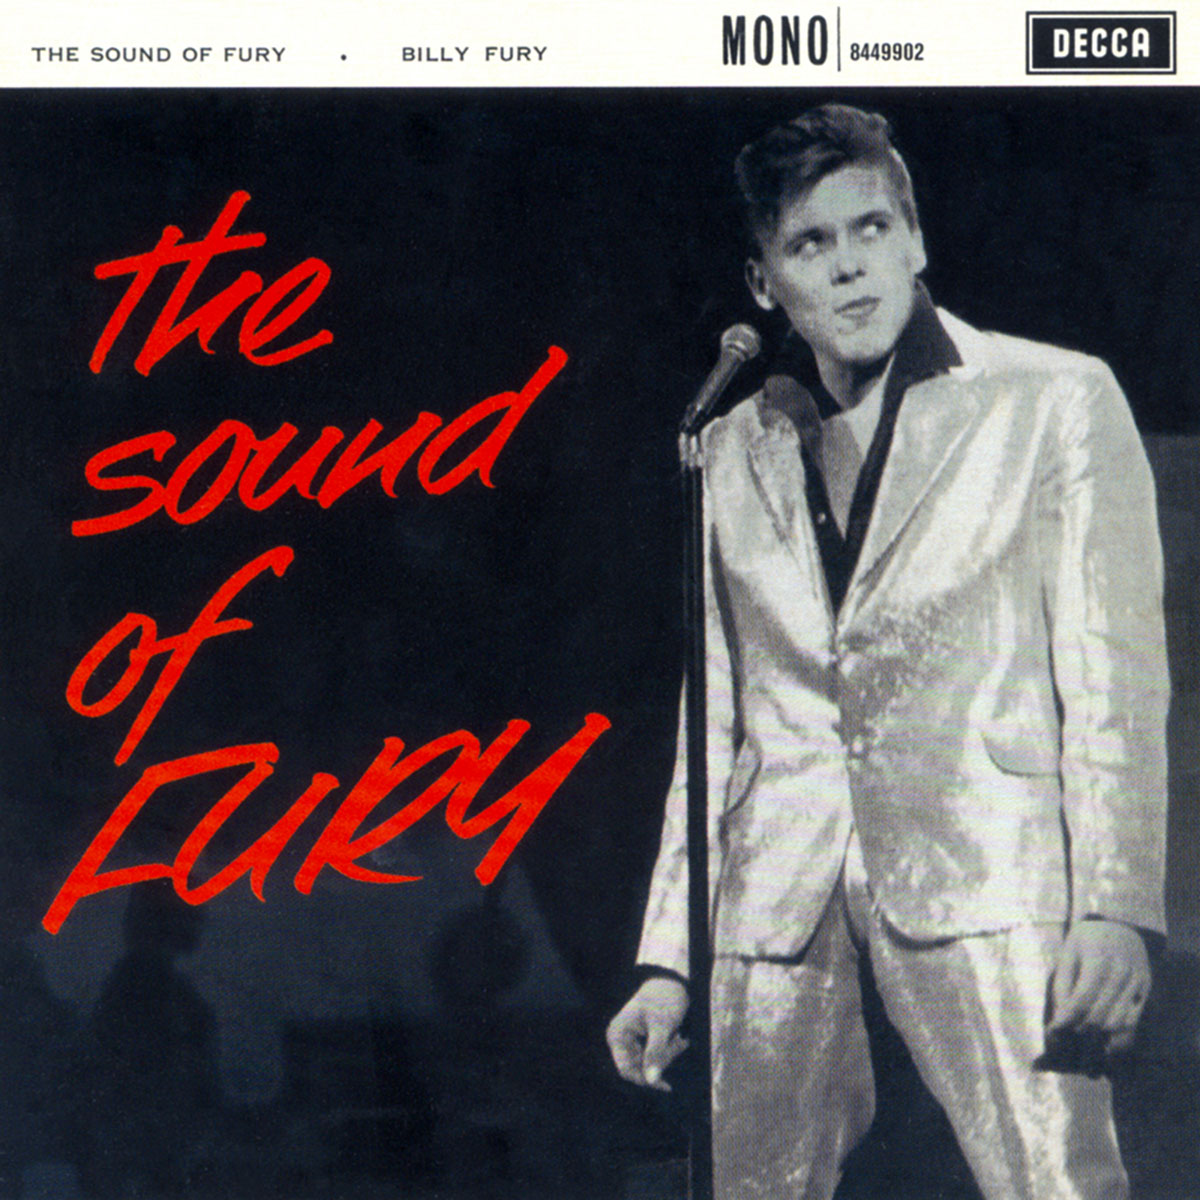 Billy Fury, The Sound of Fury, 1960.